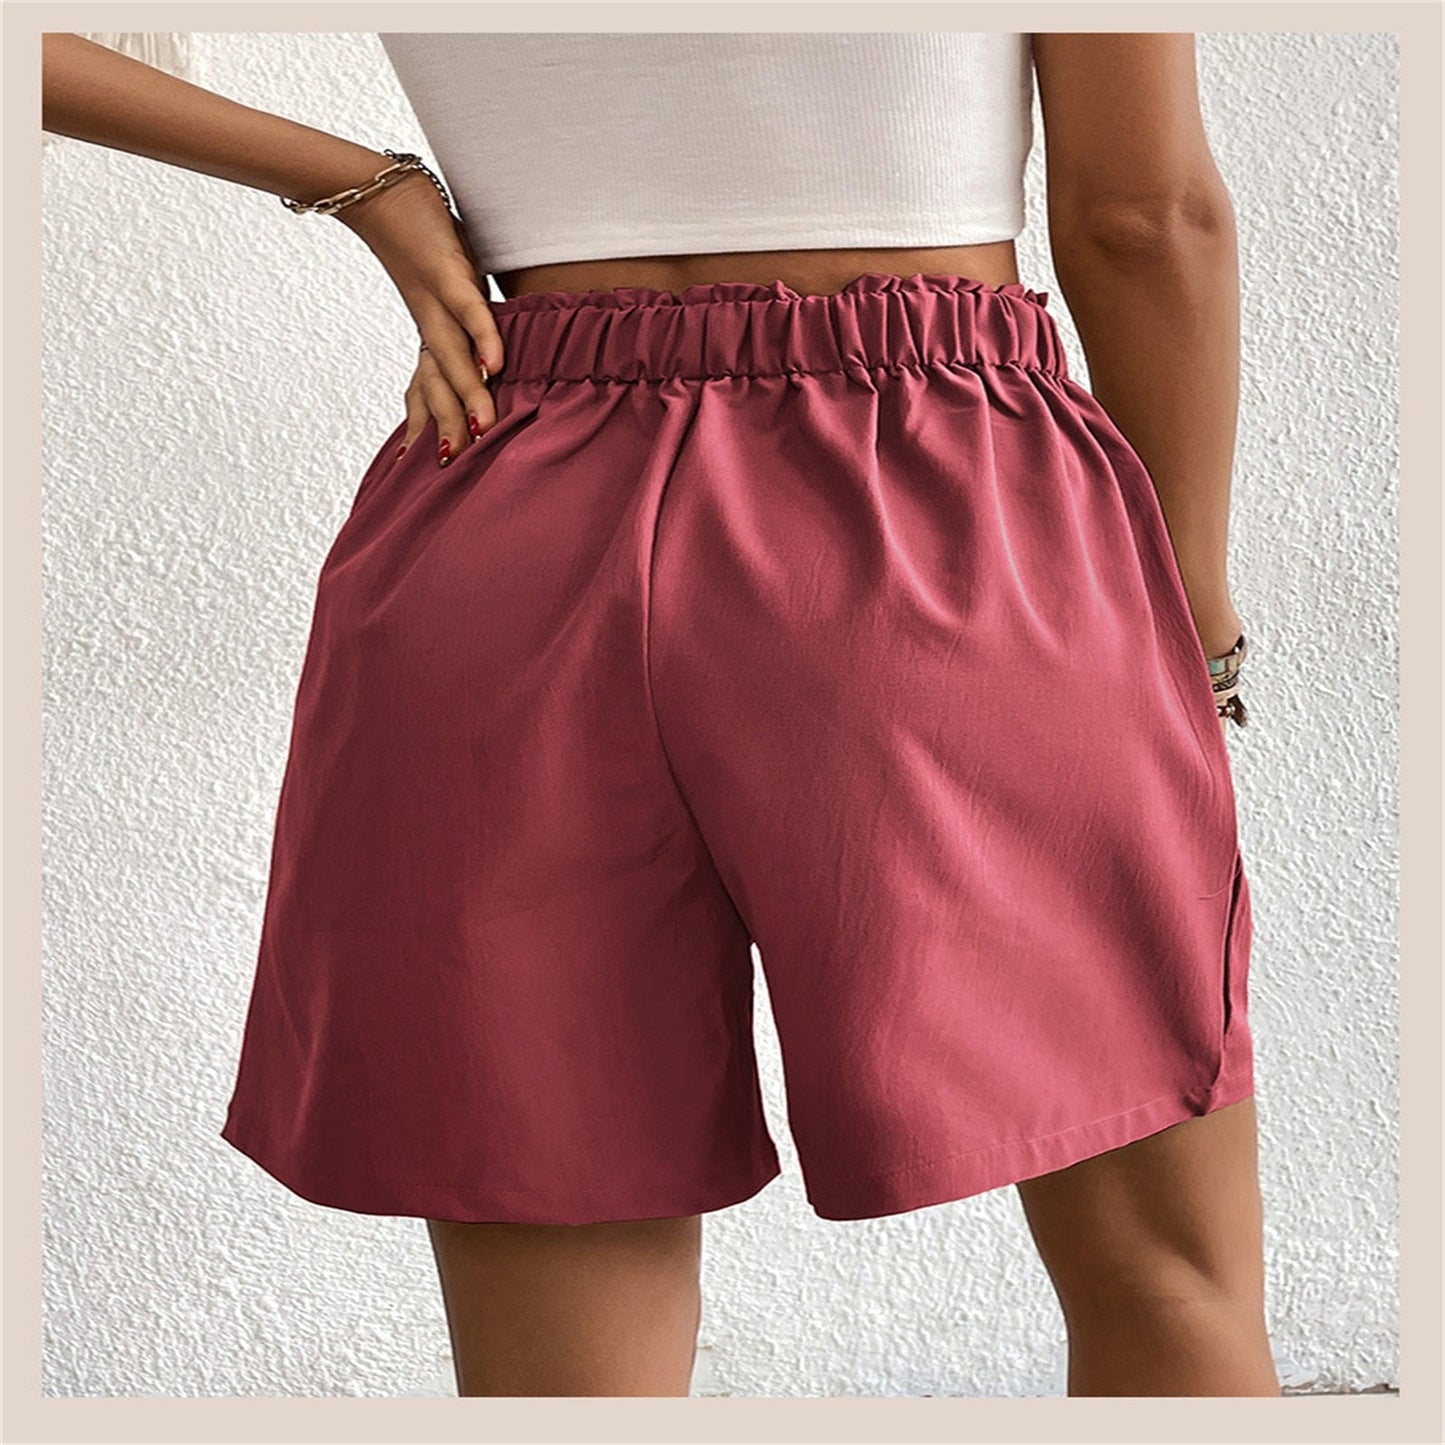 Slim Buttoned Solid Casual Short Shorts